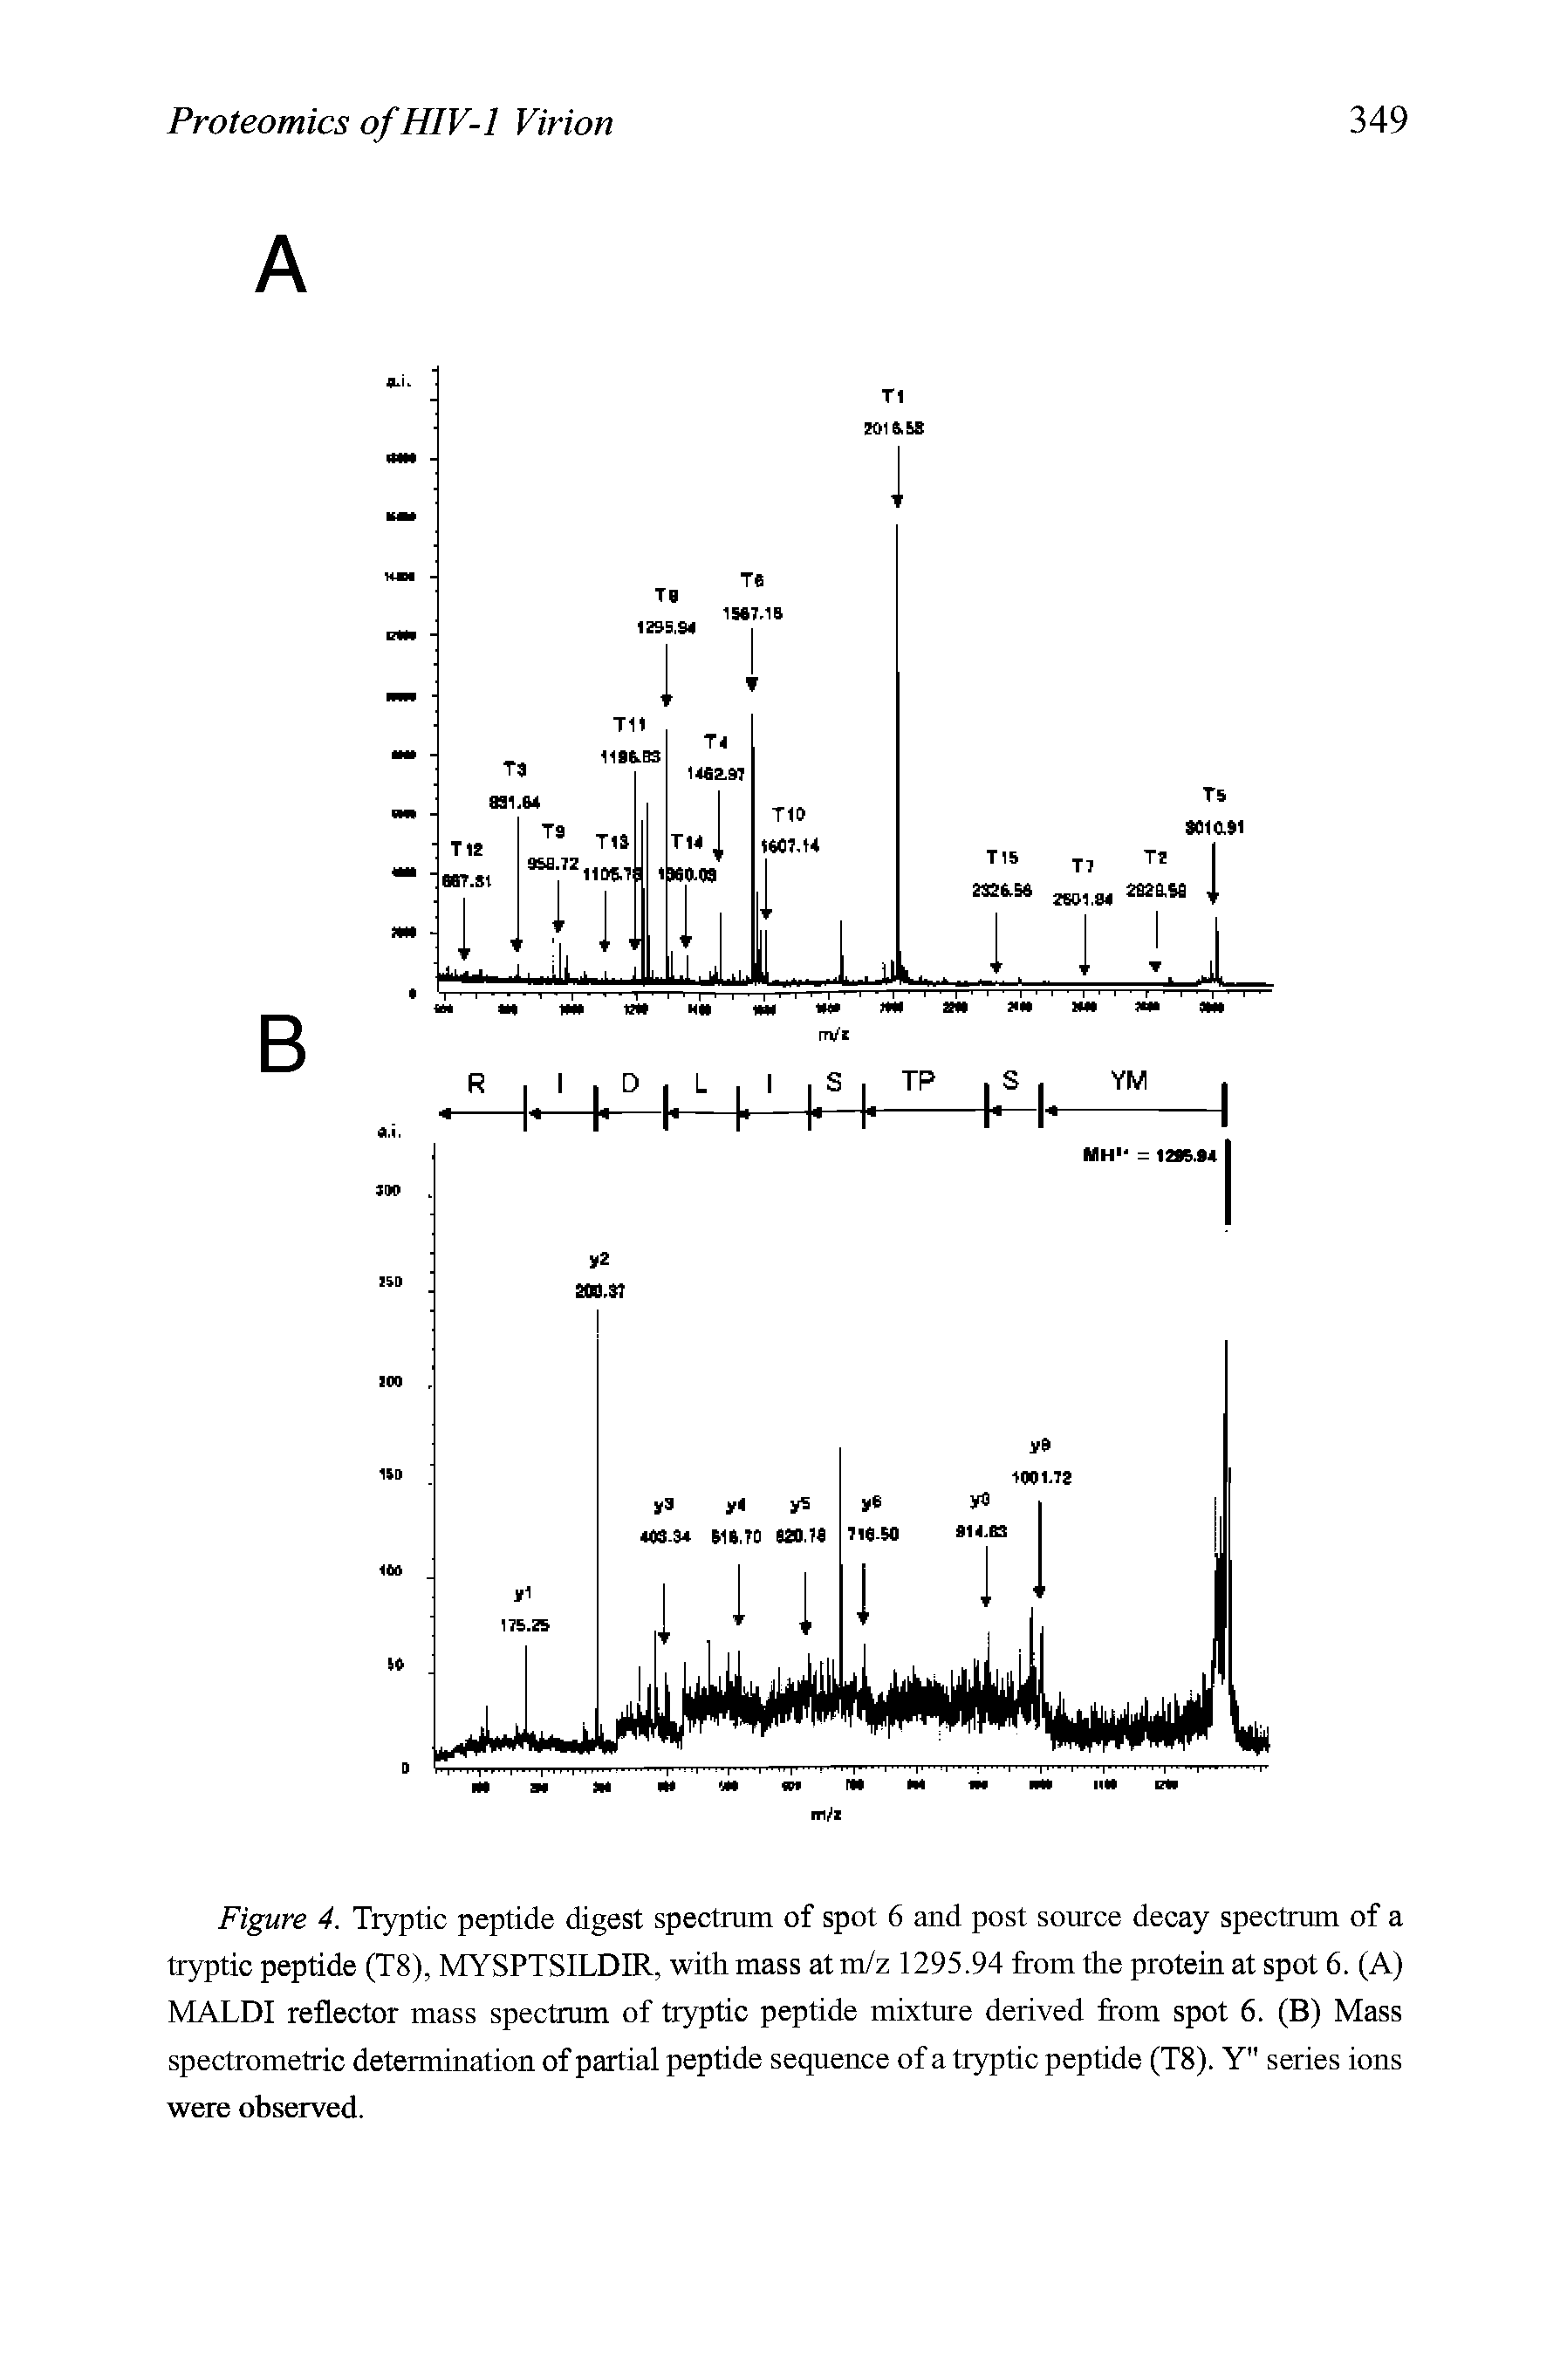 Figure 4. Tryptic peptide digest spectrum of spot 6 and post source decay spectrum of a tryptic peptide (T8), MYSPTSILDIR, with mass at m/z 1295.94 from the protein at spot 6. (A) MALDI reflector mass spectrum of tryptic peptide mixture derived from spot 6. (B) Mass spectrometric determination of partial peptide sequence of a tryptic peptide (T8). Y" series ions were observed.